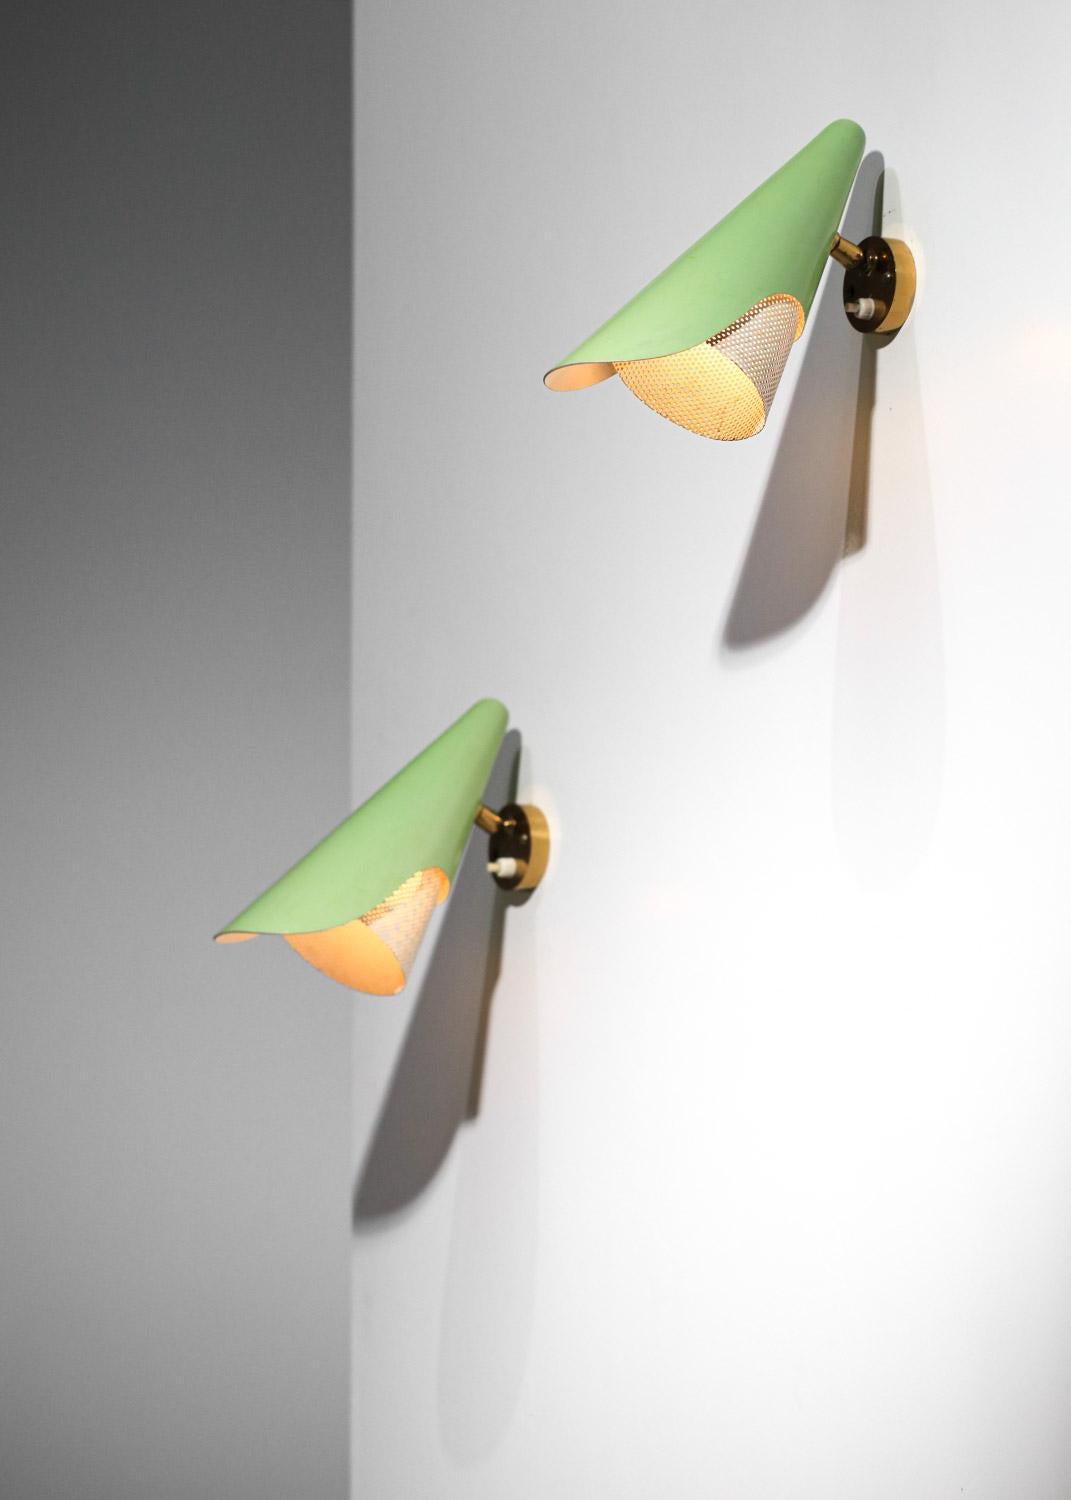 Pair of Italian wall sconces from the '60s by Stilux. Wall plate and central ball-and-socket joint in solid brass with patina finish, allowing the lampshade to be oriented. Light green lacquered metal lampshade and white lacquered rigitulle